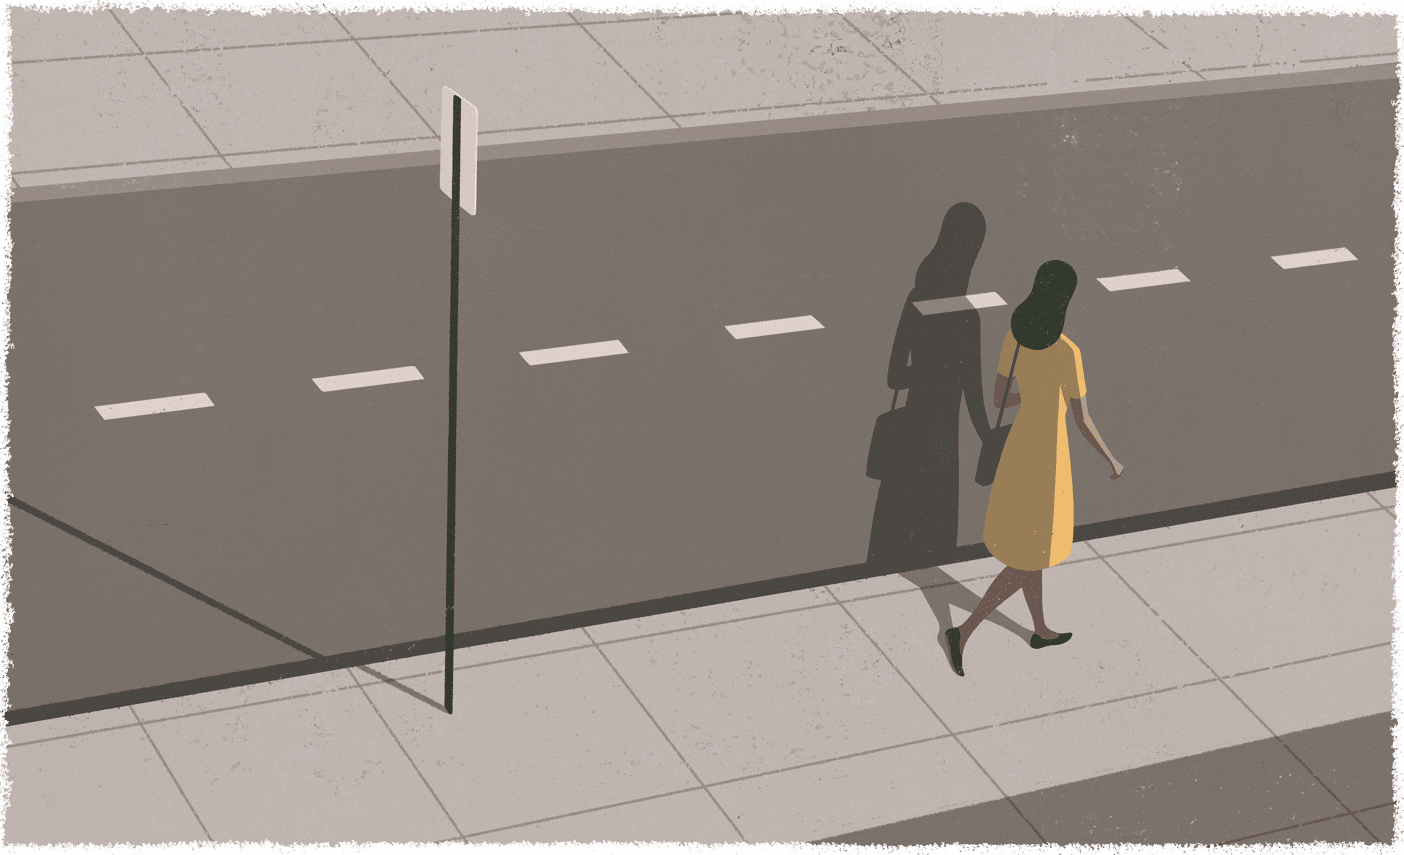 An illustration of a woman walking alone down the street with just her shadow.